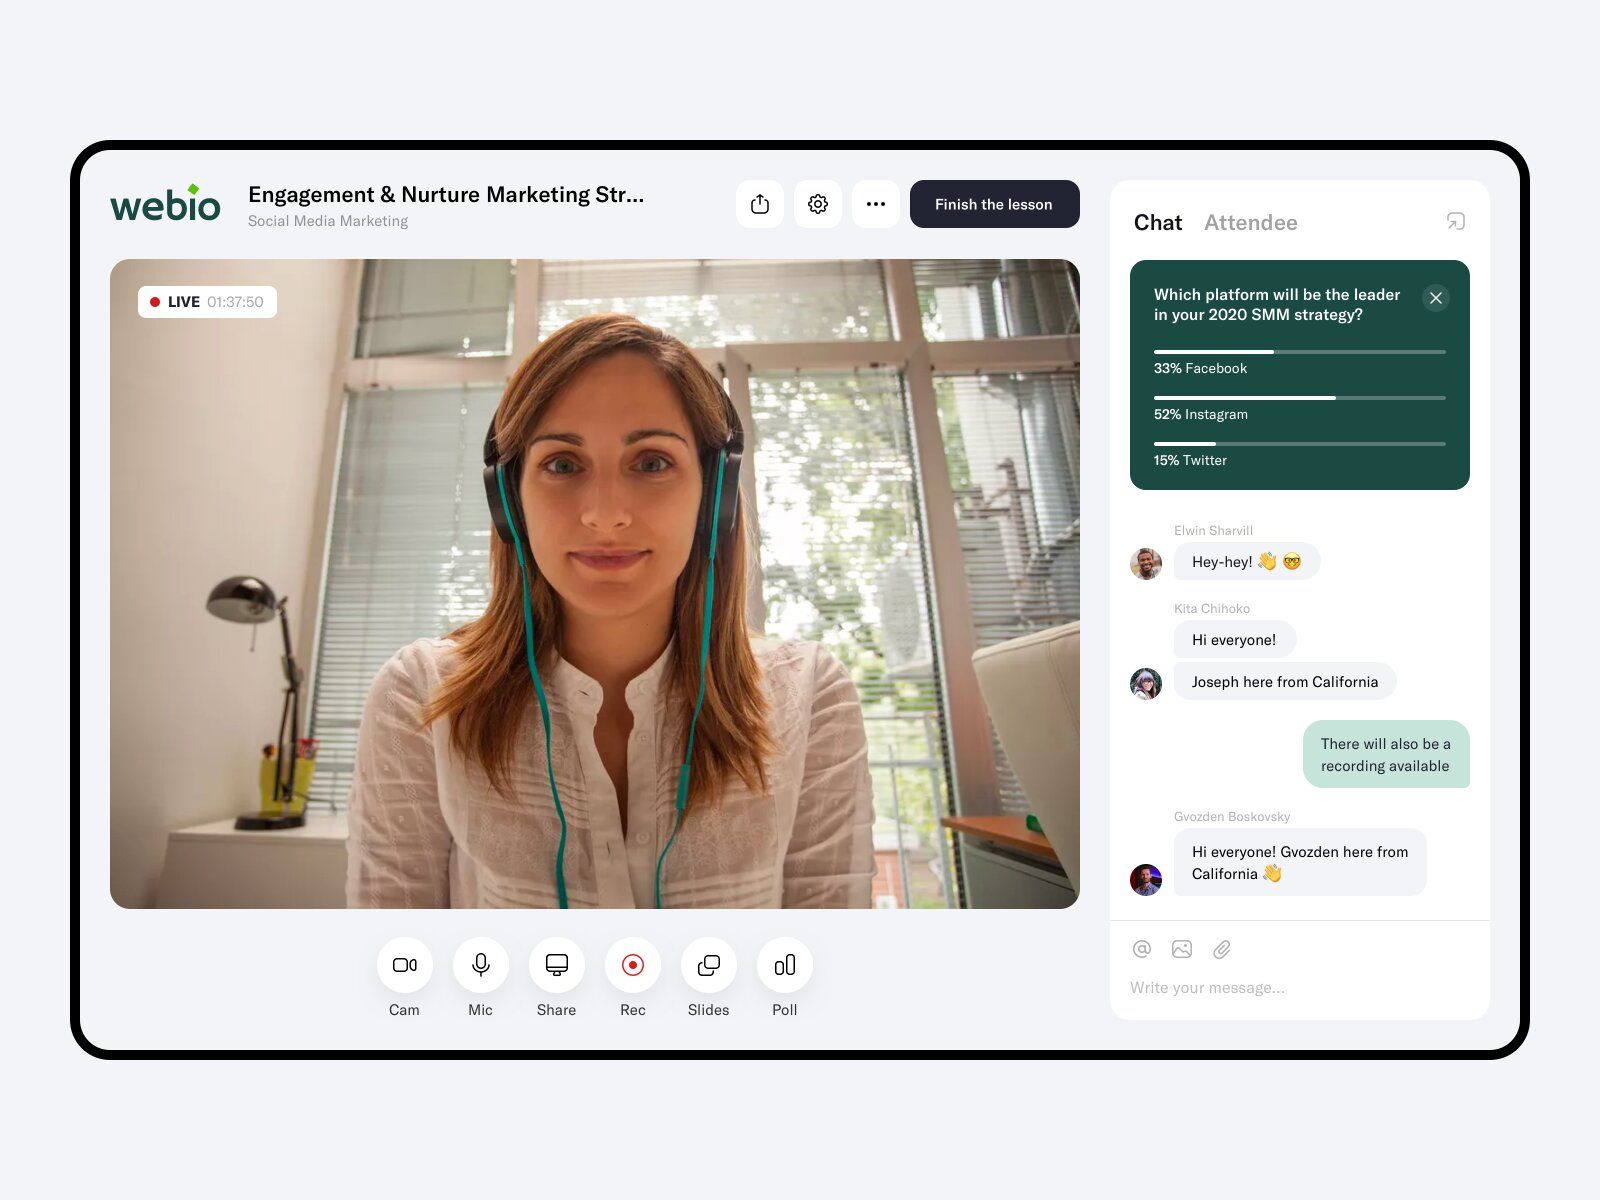 You may enhance video calls on your eLearning website or app with features like screen sharing or built-in polls to give users additional value (*image by [Eugene Olefir](https://dribbble.com/olefir){ rel="nofollow" .default-md}*)